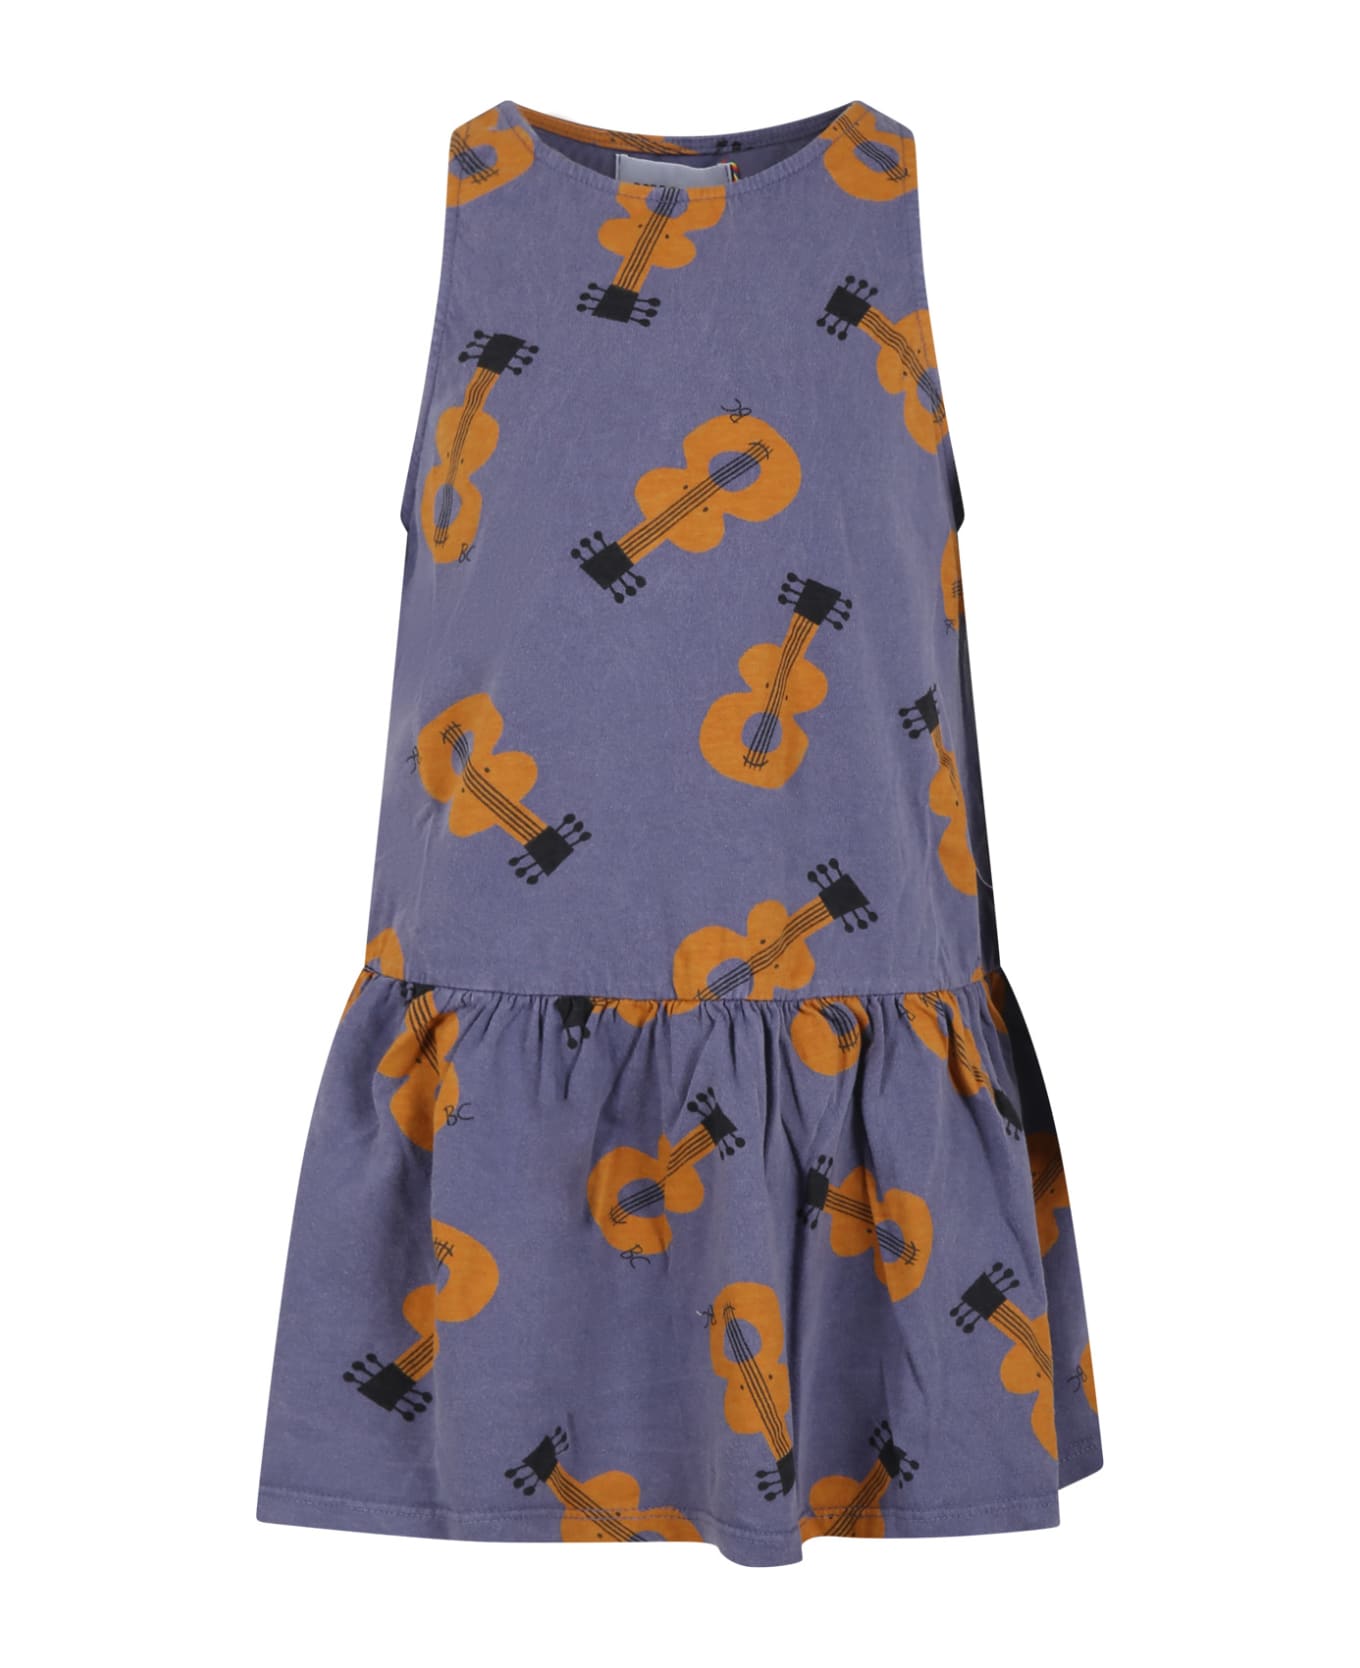 Bobo Choses Purple Dress For Girl With Guitars - Violet ワンピース＆ドレス